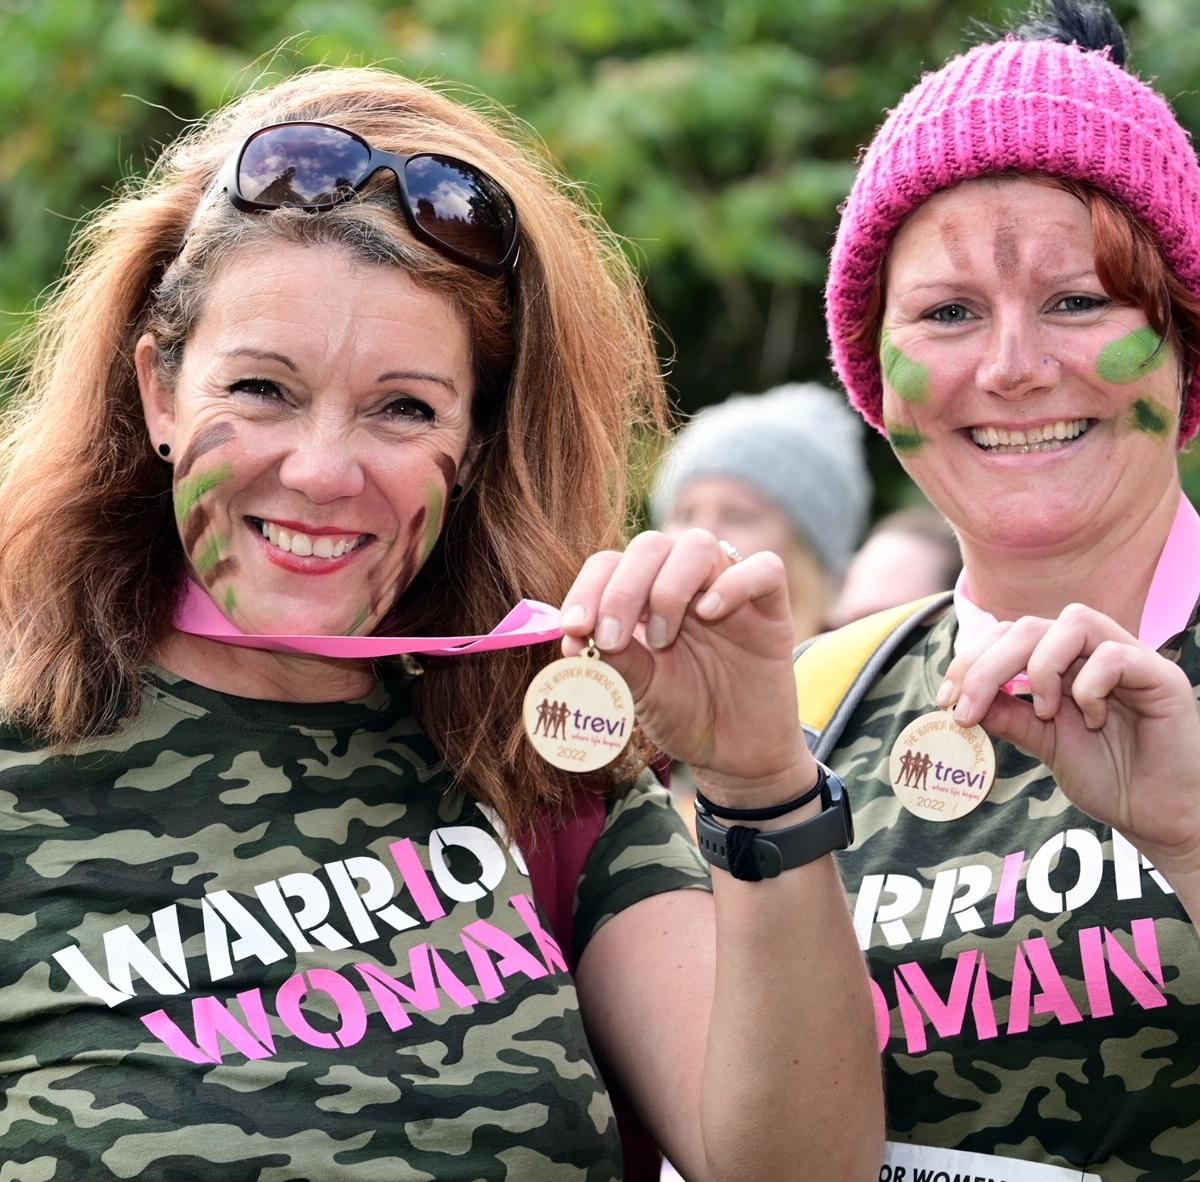 You are currently viewing Dartmoor Warrior Women ‘Smash it’ on charity walk